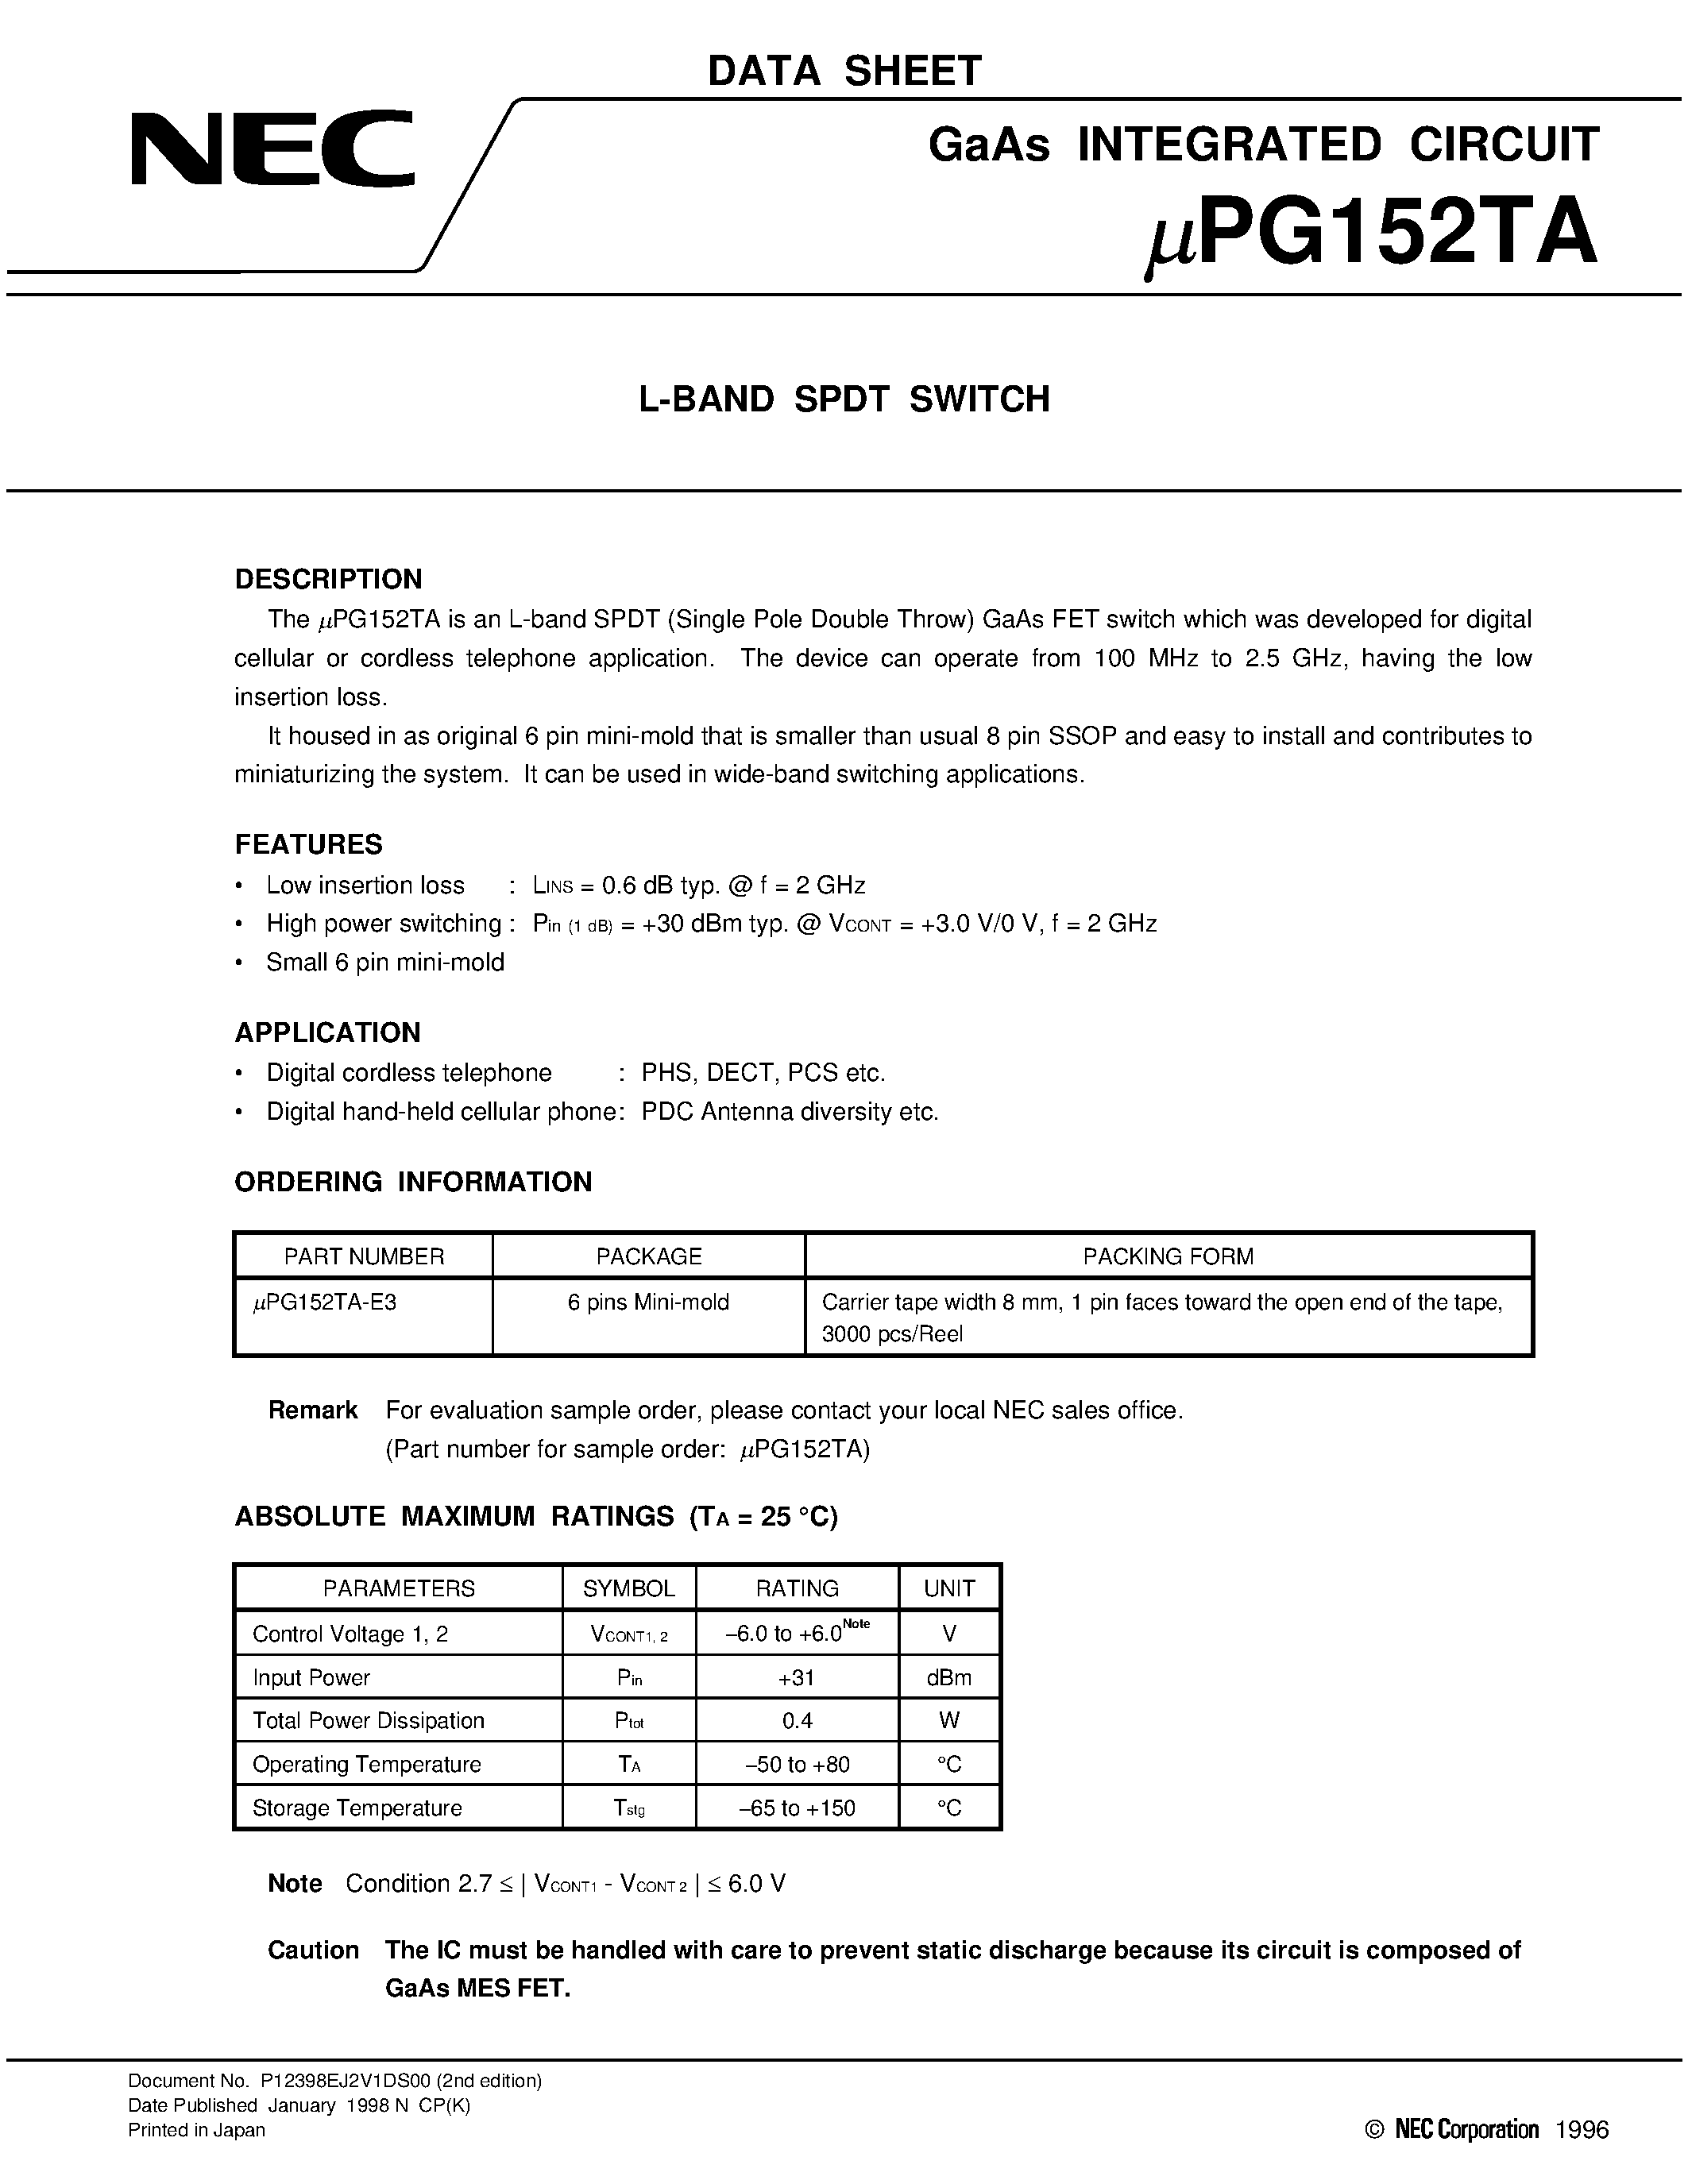 Datasheet UPG152TA-E3 - L-BAND SPDT SWITCH page 1